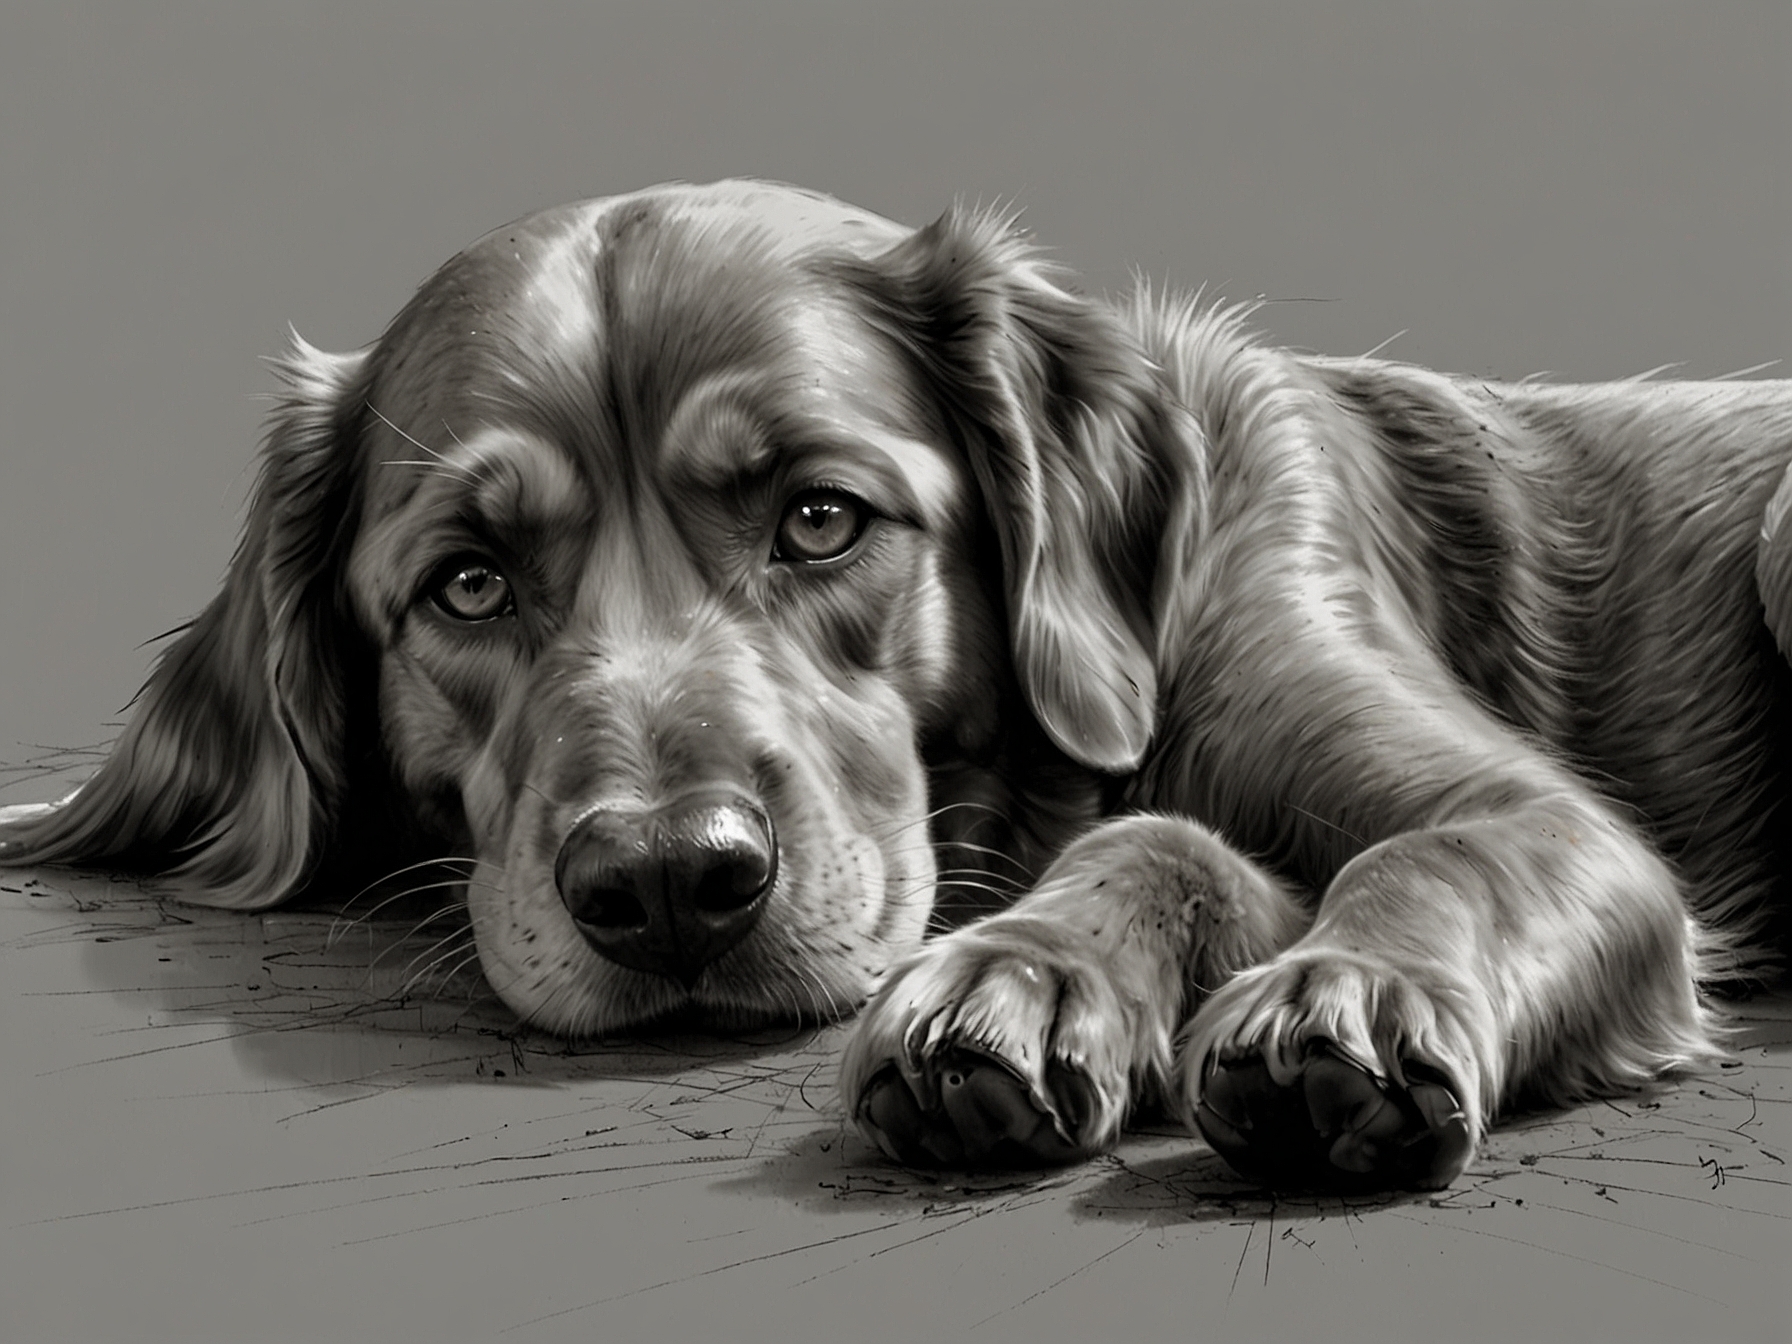 A dog with a sad expression lying down, illustrating lethargy or energy loss due to pain.